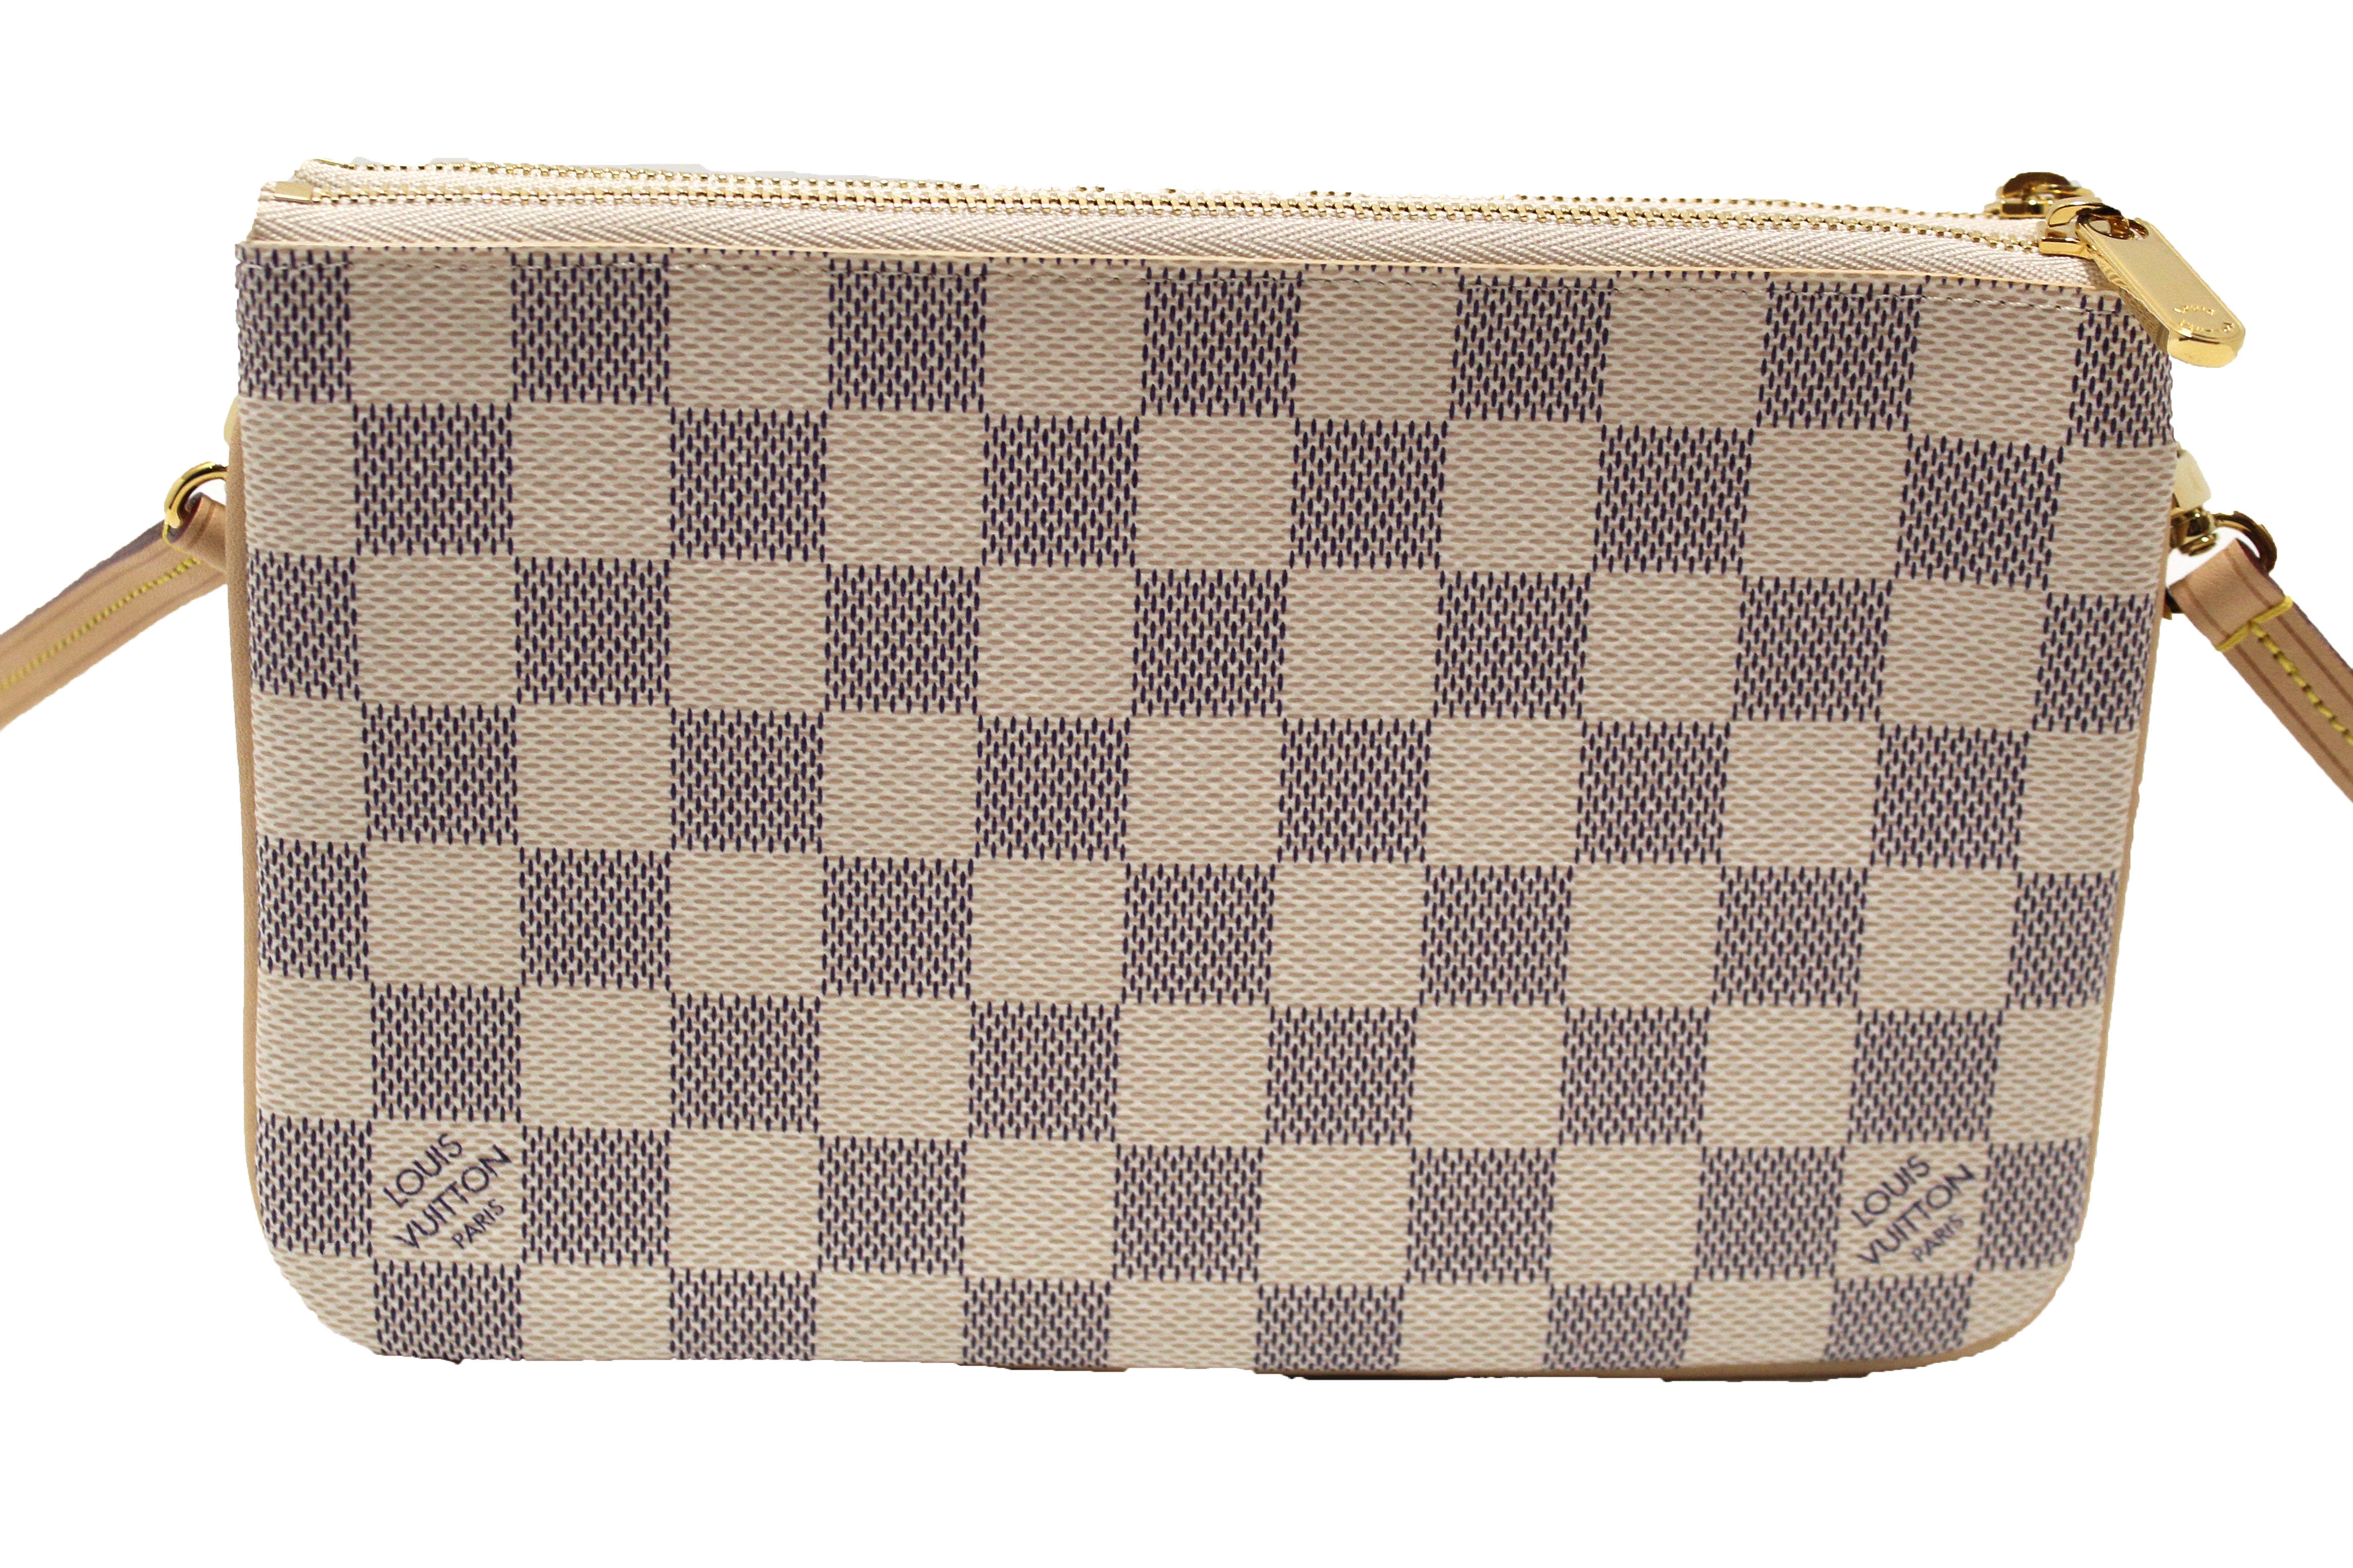 Double Zip Pochette Damier Azur Canvas - Wallets and Small Leather Goods  N60460